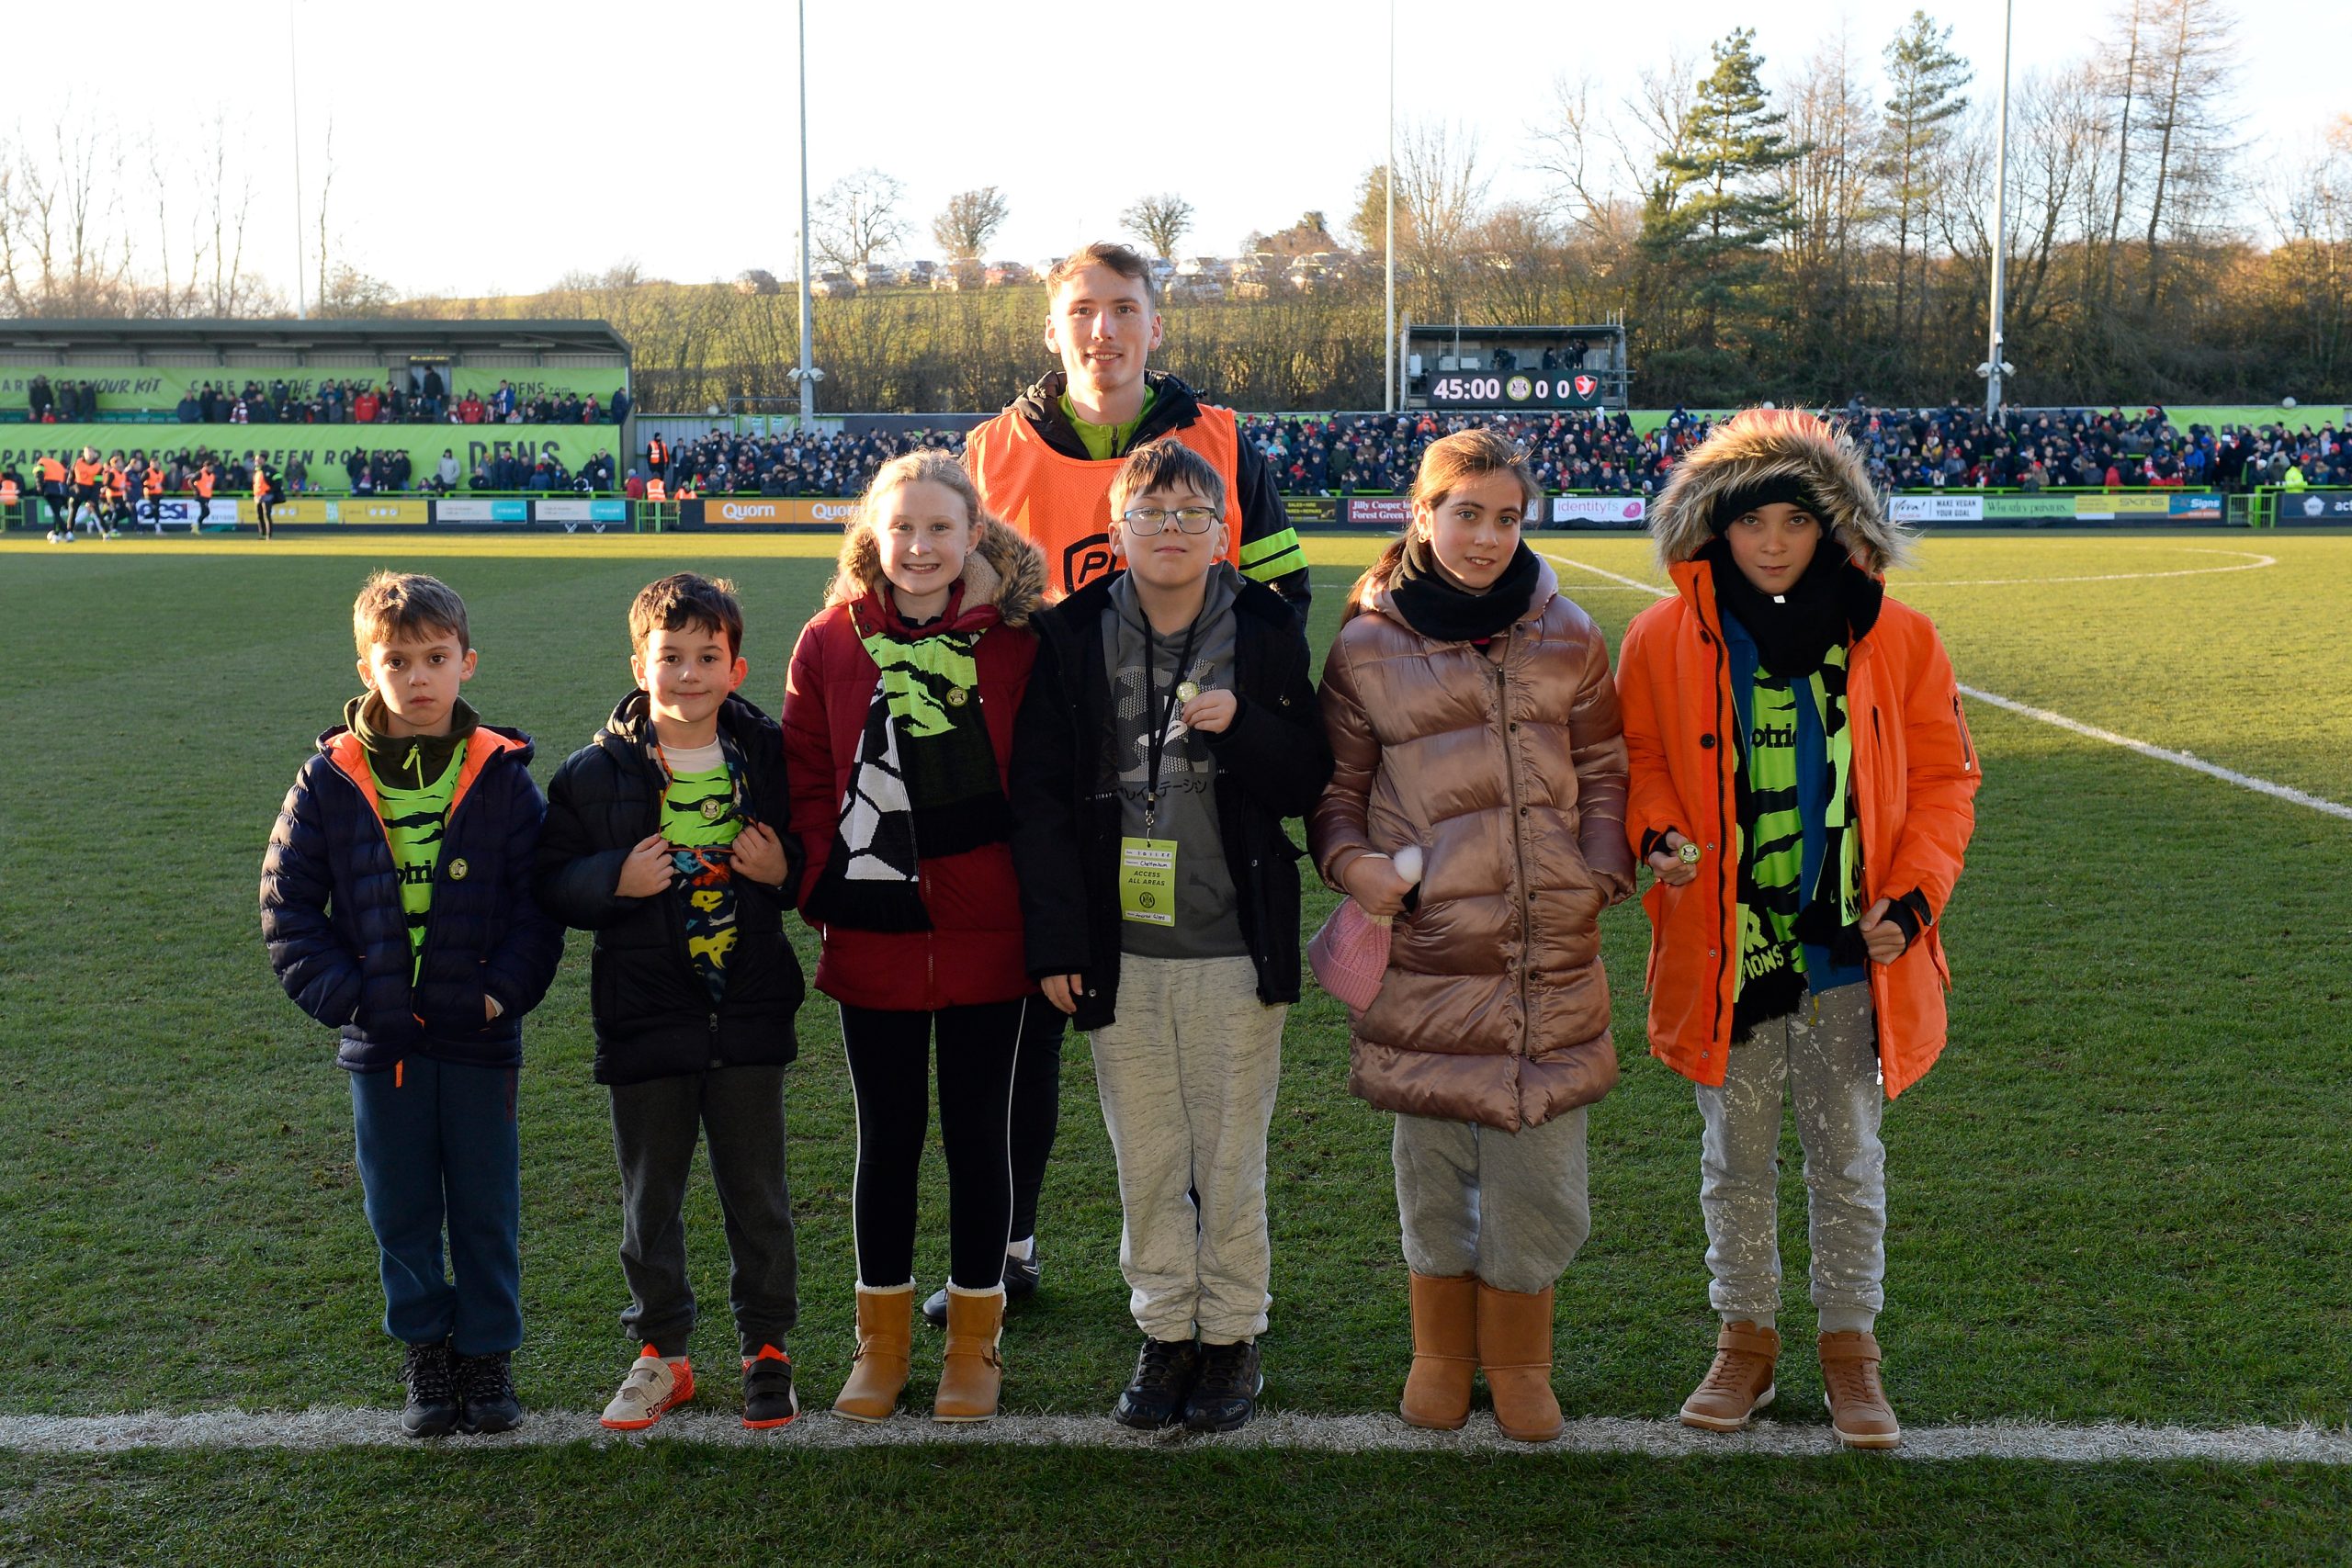 Following the tremendous success of the much-loved Youth Ambassadors Scheme, Forest Green Rovers (FGR) has invited fans of all ages to leave the sidelines and get involved in the clubs behind the scenes operations.